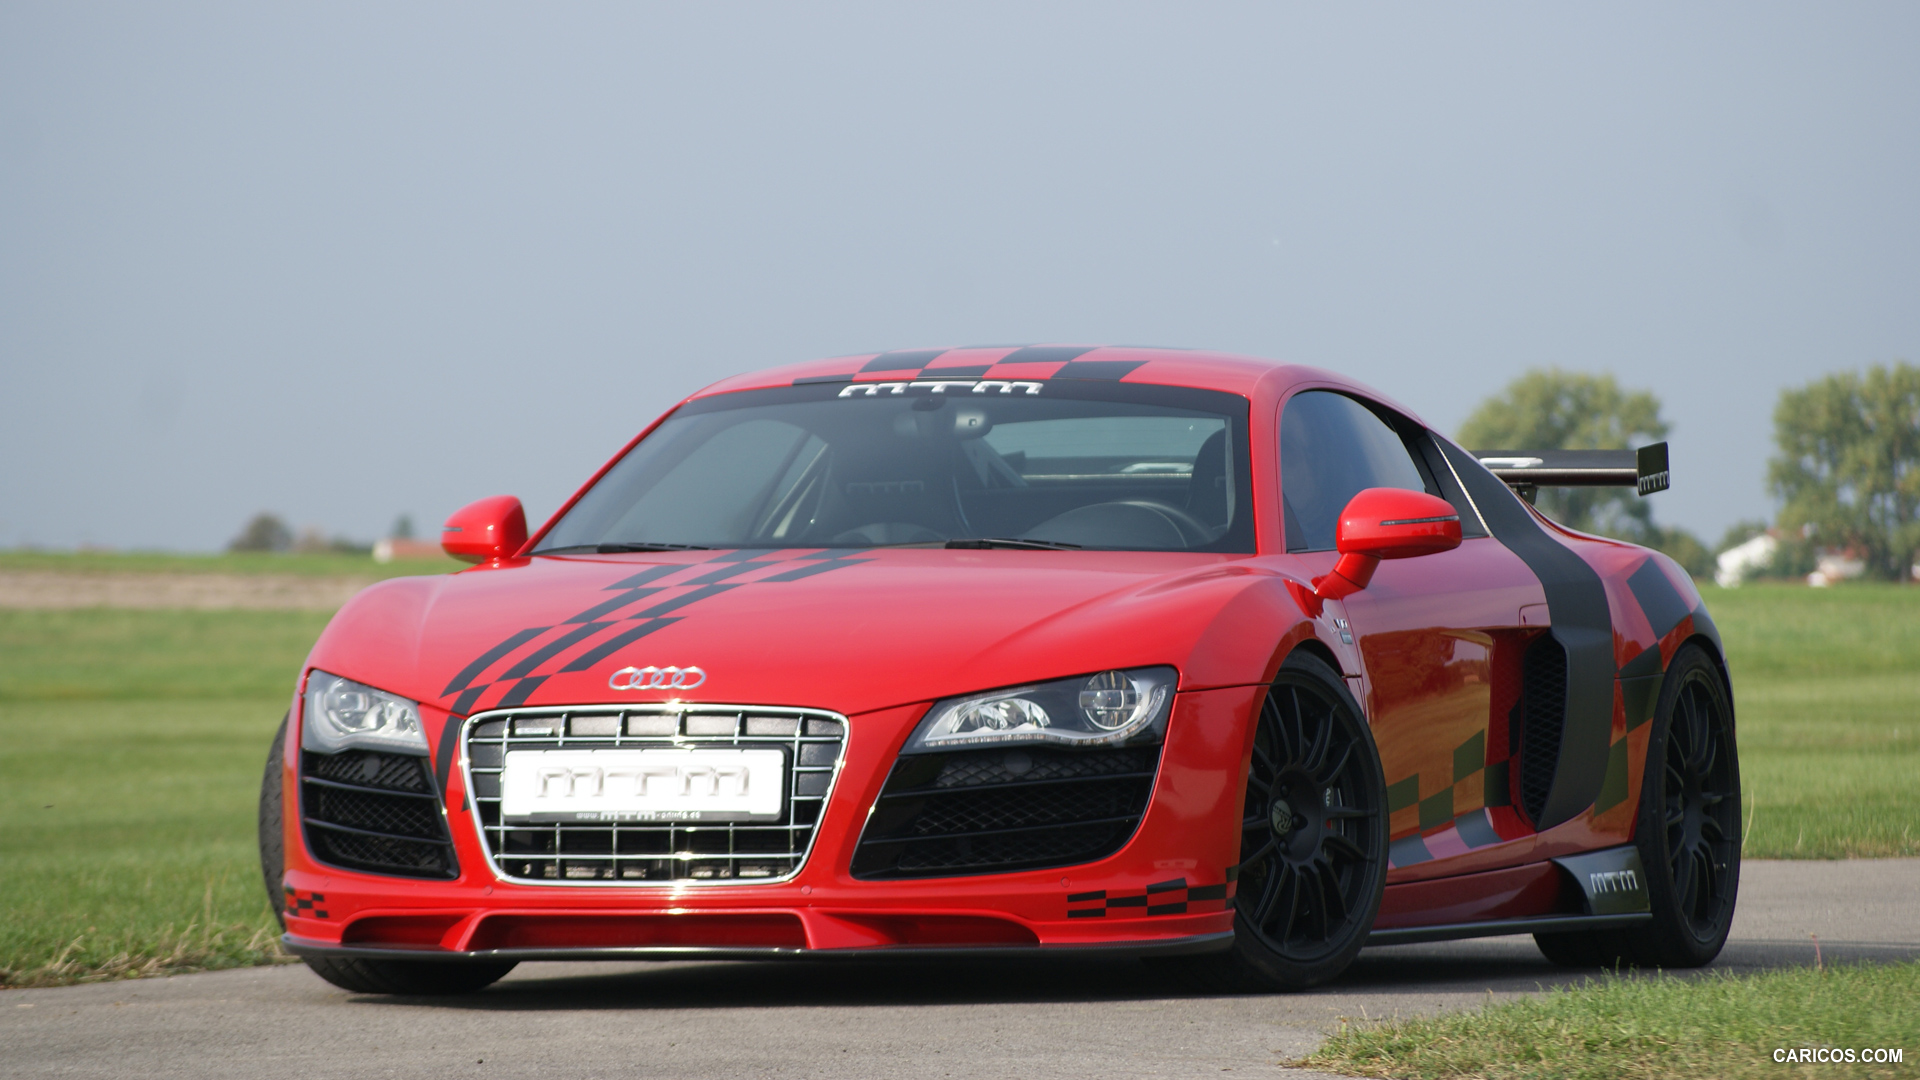 MTM Audi R8 V10 (2013) Coupe - Front, #17 of 21